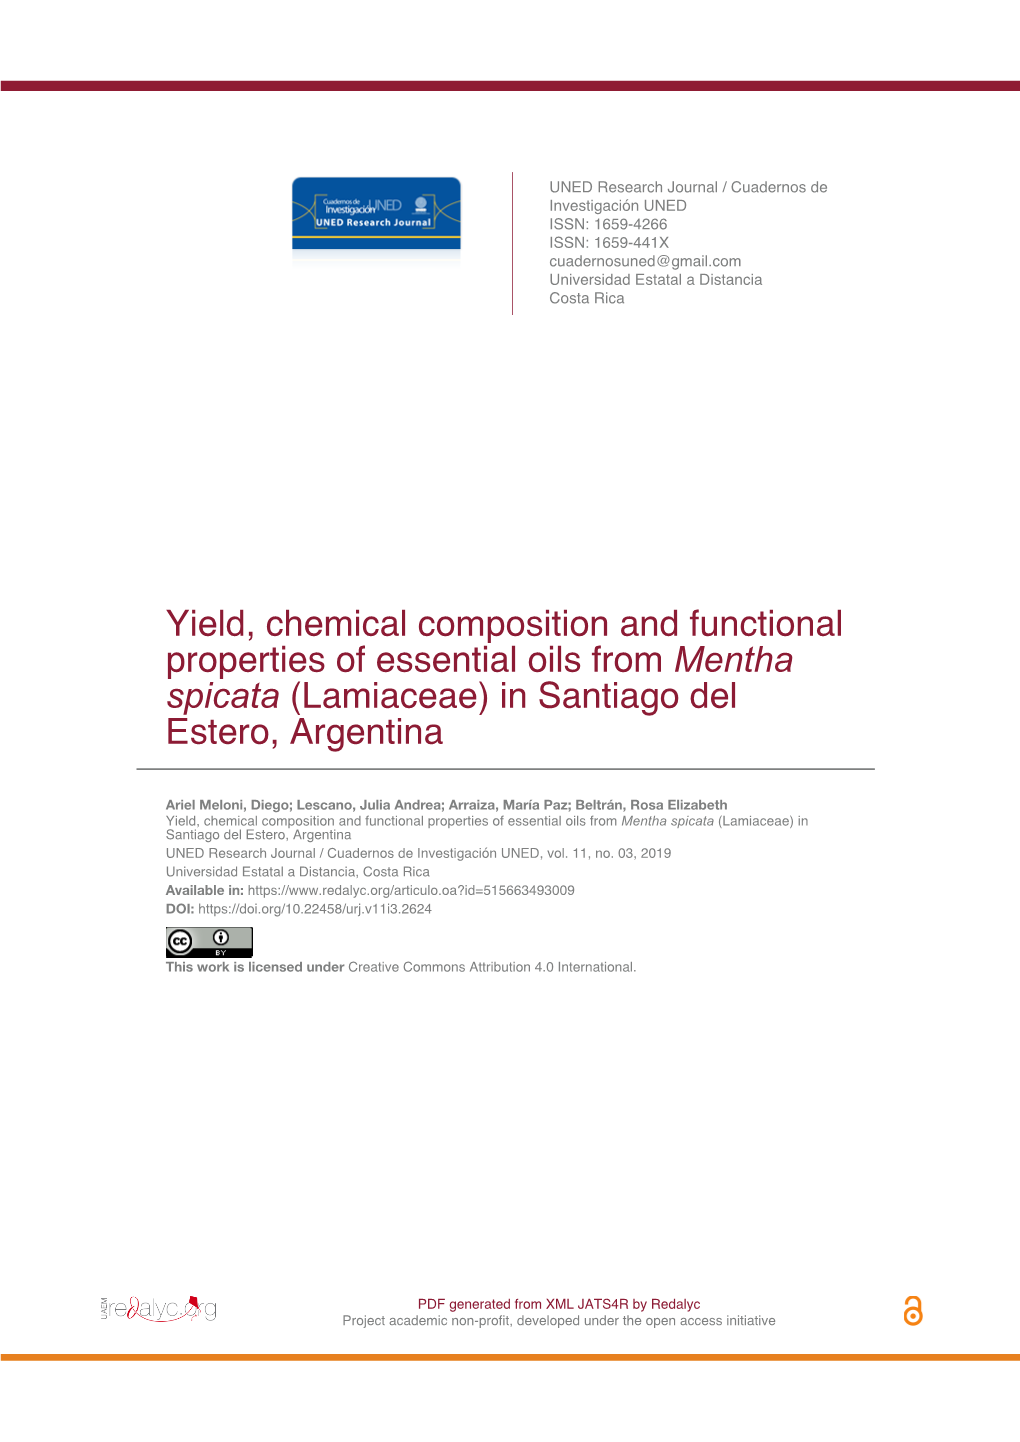 Yield, Chemical Composition and Functional Properties of Essential Oils from Mentha Spicata (Lamiaceae) in Santiago Del Estero, Argentina